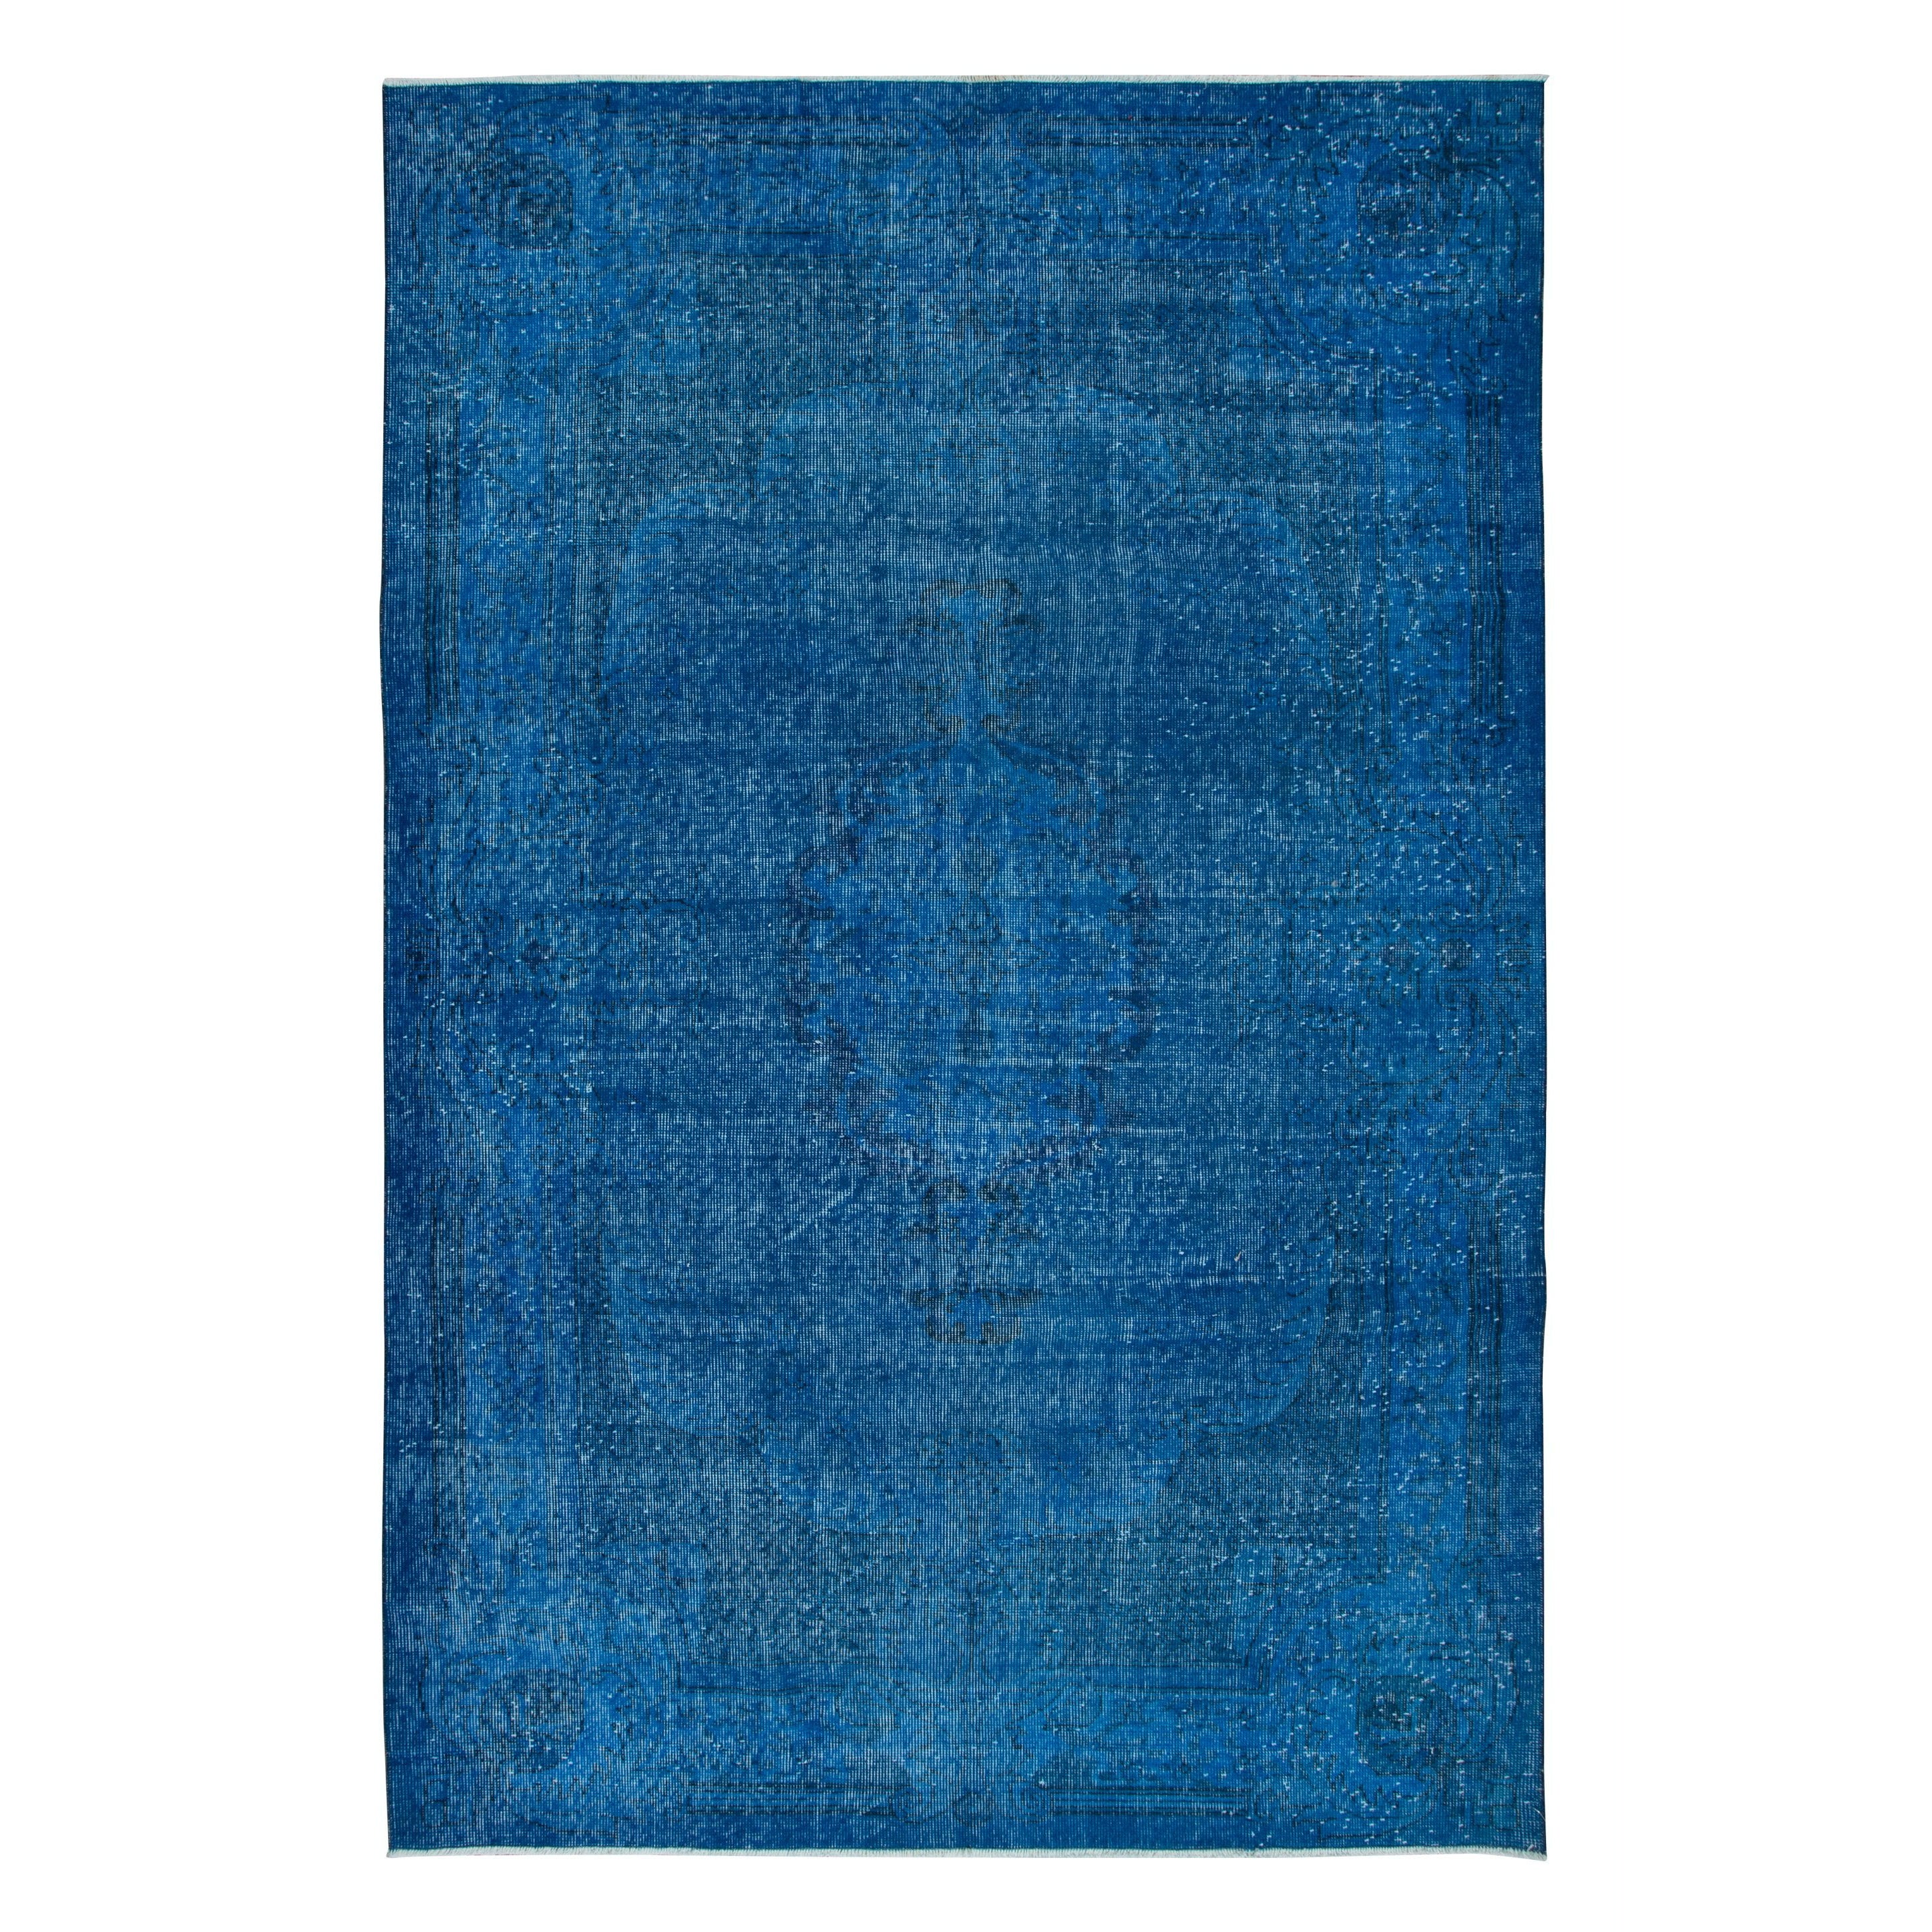 6x9 Ft Modern Blue Area Rug made of wool and cotton, Hand-Knotted in Turkey